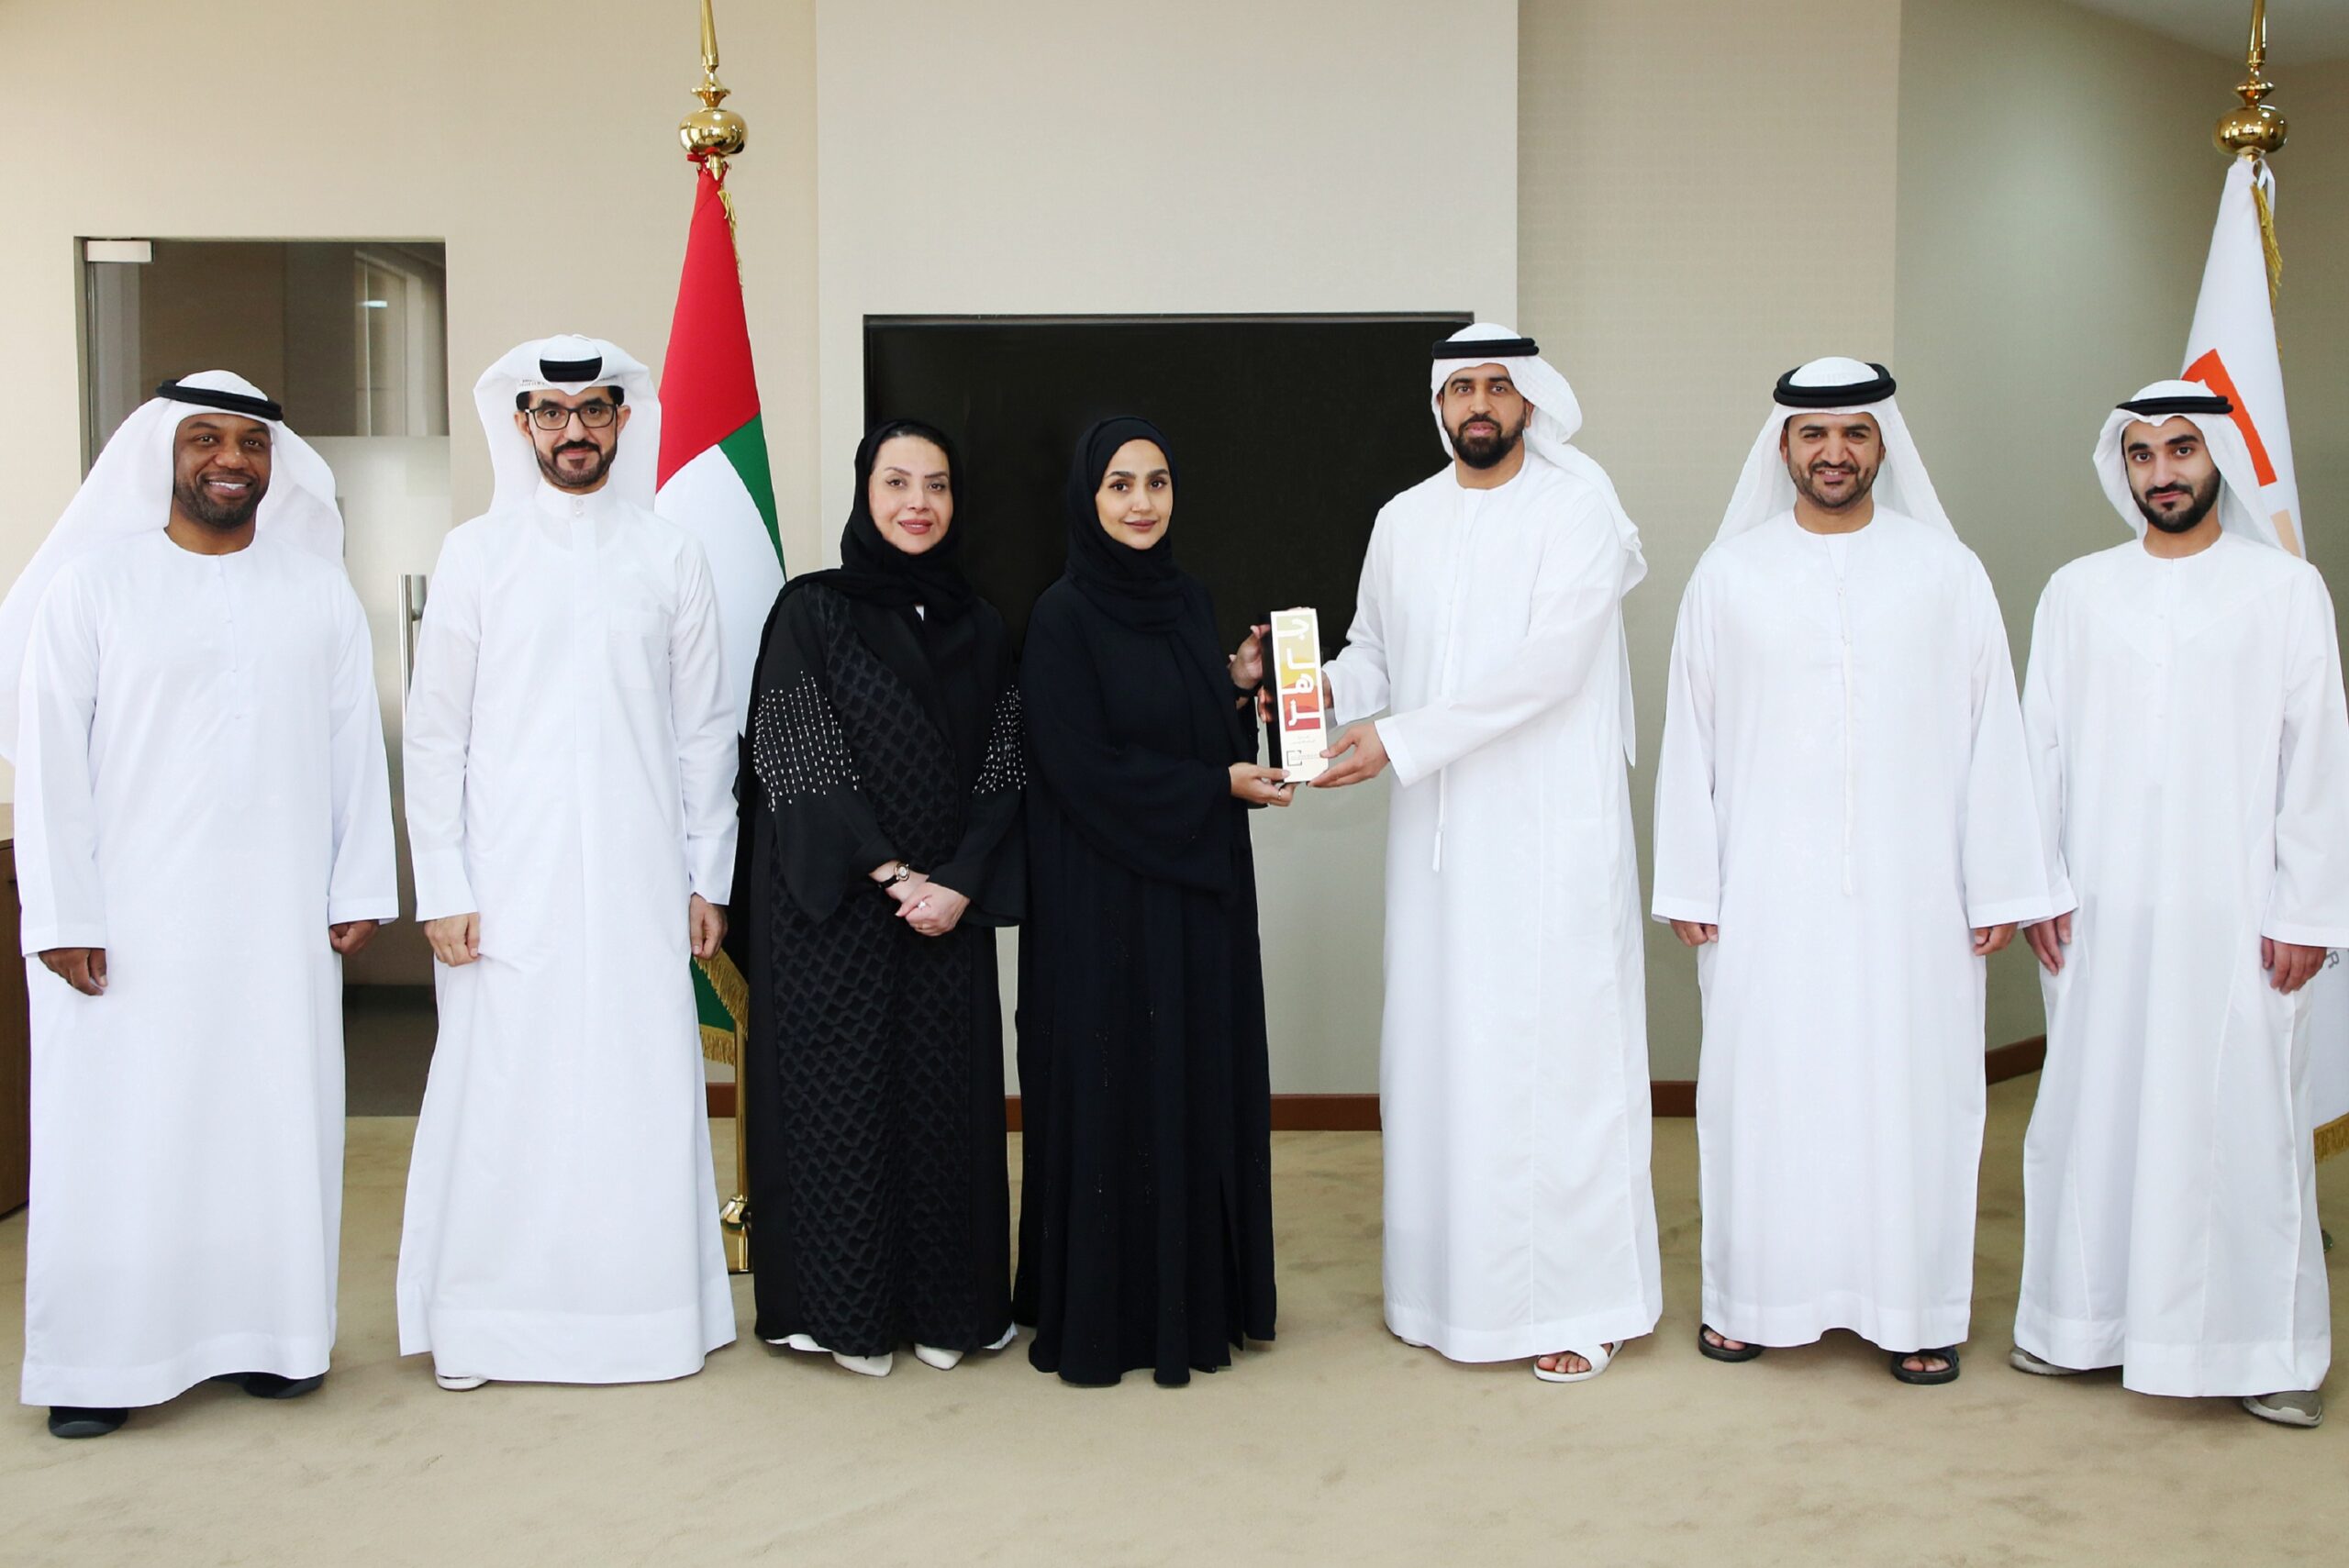 Image for FGIC Wins The Metaverse Badge As Part Of The Upskilling Federal Government Talents With Future Skills Awards Through “Jahiz” Platform